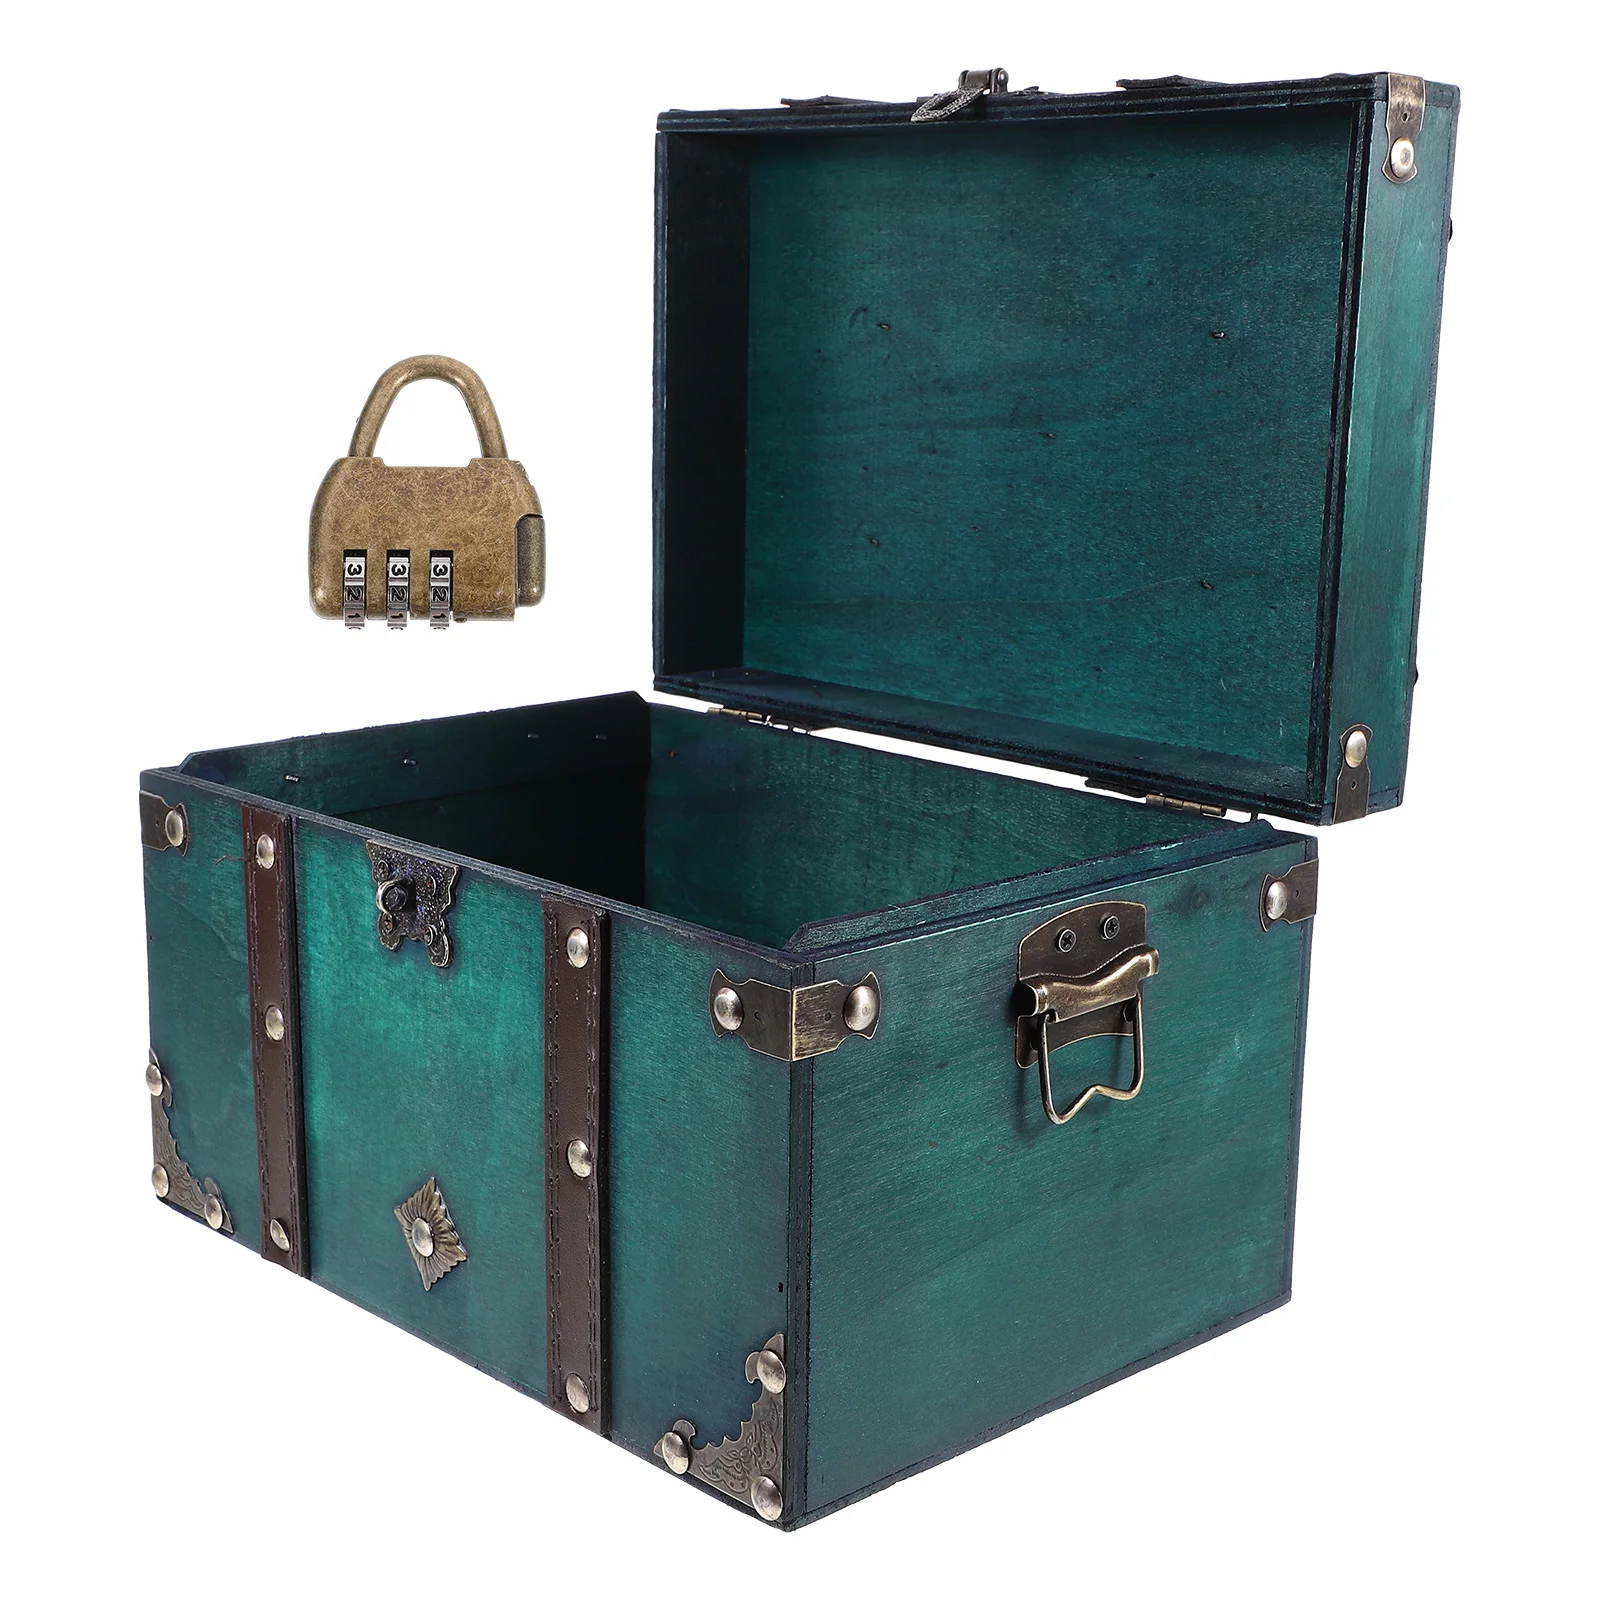 

Vintage Storage Box Treasure Chest Jewelry Case Pirate Photo Prop Wood Organizer Small Wooden Boxes